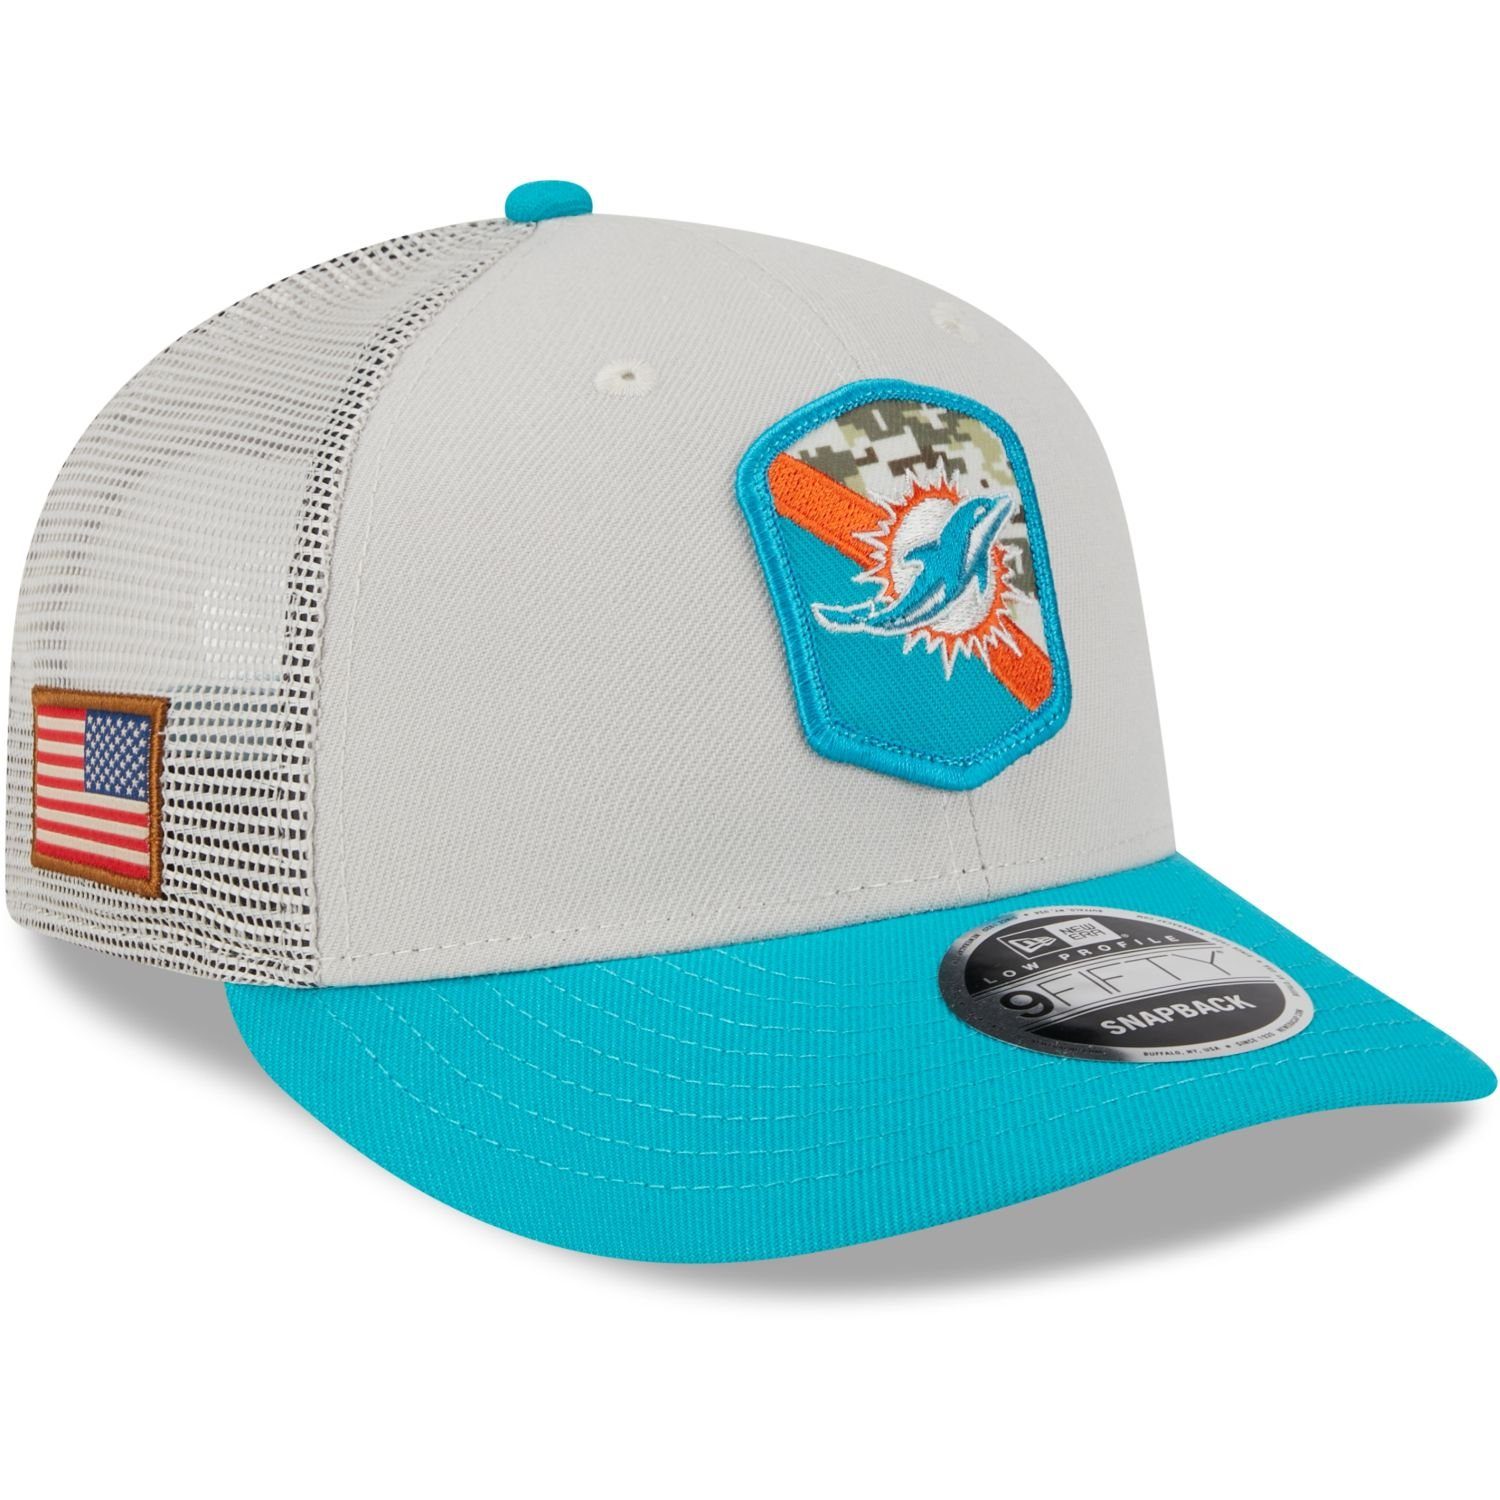 New Era Snapback Cap 9Fifty Low Profile Snap NFL Salute to Service Miami Dolphins